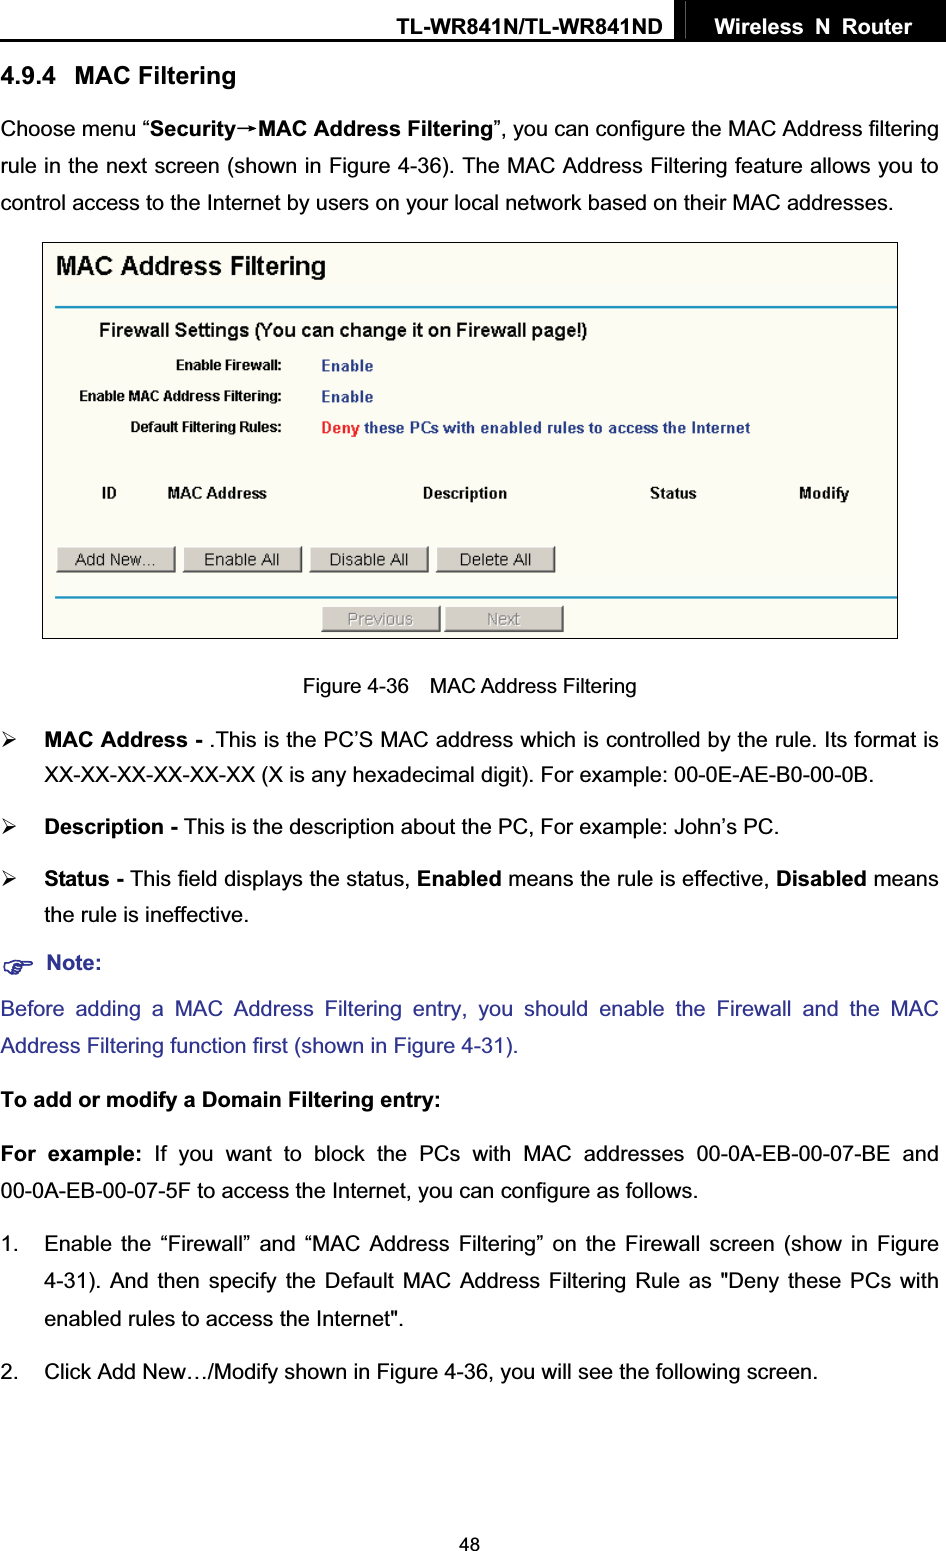 TL-WR841N/TL-WR841ND  Wireless N Router  484.9.4 MAC Filtering Choose menu “SecurityėMAC Address Filtering”, you can configure the MAC Address filtering rule in the next screen (shown in Figure 4-36). The MAC Address Filtering feature allows you to control access to the Internet by users on your local network based on their MAC addresses. Figure 4-36  MAC Address Filtering ¾MAC Address - .This is the PC’S MAC address which is controlled by the rule. Its format is XX-XX-XX-XX-XX-XX (X is any hexadecimal digit). For example: 00-0E-AE-B0-00-0B. ¾Description - This is the description about the PC, For example: John’s PC. ¾Status - This field displays the status, Enabled means the rule is effective, Disabled means the rule is ineffective. )Note:Before adding a MAC Address Filtering entry, you should enable the Firewall and the MAC Address Filtering function first (shown in Figure 4-31). To add or modify a Domain Filtering entry: For example: If you want to block the PCs with MAC addresses 00-0A-EB-00-07-BE and 00-0A-EB-00-07-5F to access the Internet, you can configure as follows. 1.  Enable the “Firewall” and “MAC Address Filtering” on the Firewall screen (show in Figure 4-31). And then specify the Default MAC Address Filtering Rule as &quot;Deny these PCs with enabled rules to access the Internet&quot;. 2.  Click Add New…/Modify shown in Figure 4-36, you will see the following screen. 